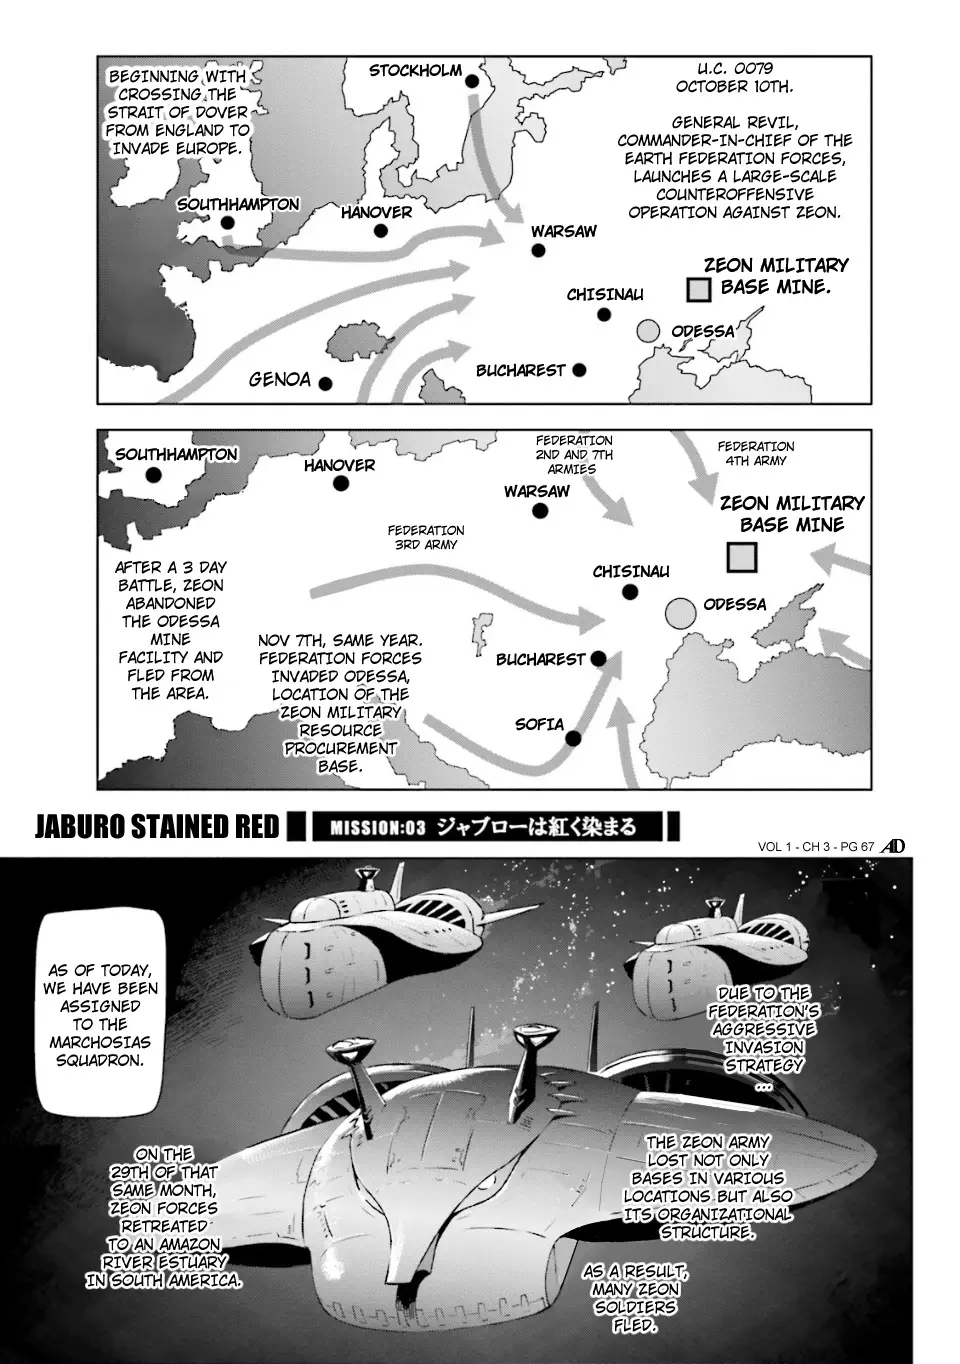 Mobile Suit Gundam Side Story - Missing Link - 3 page 1-4fb821a9